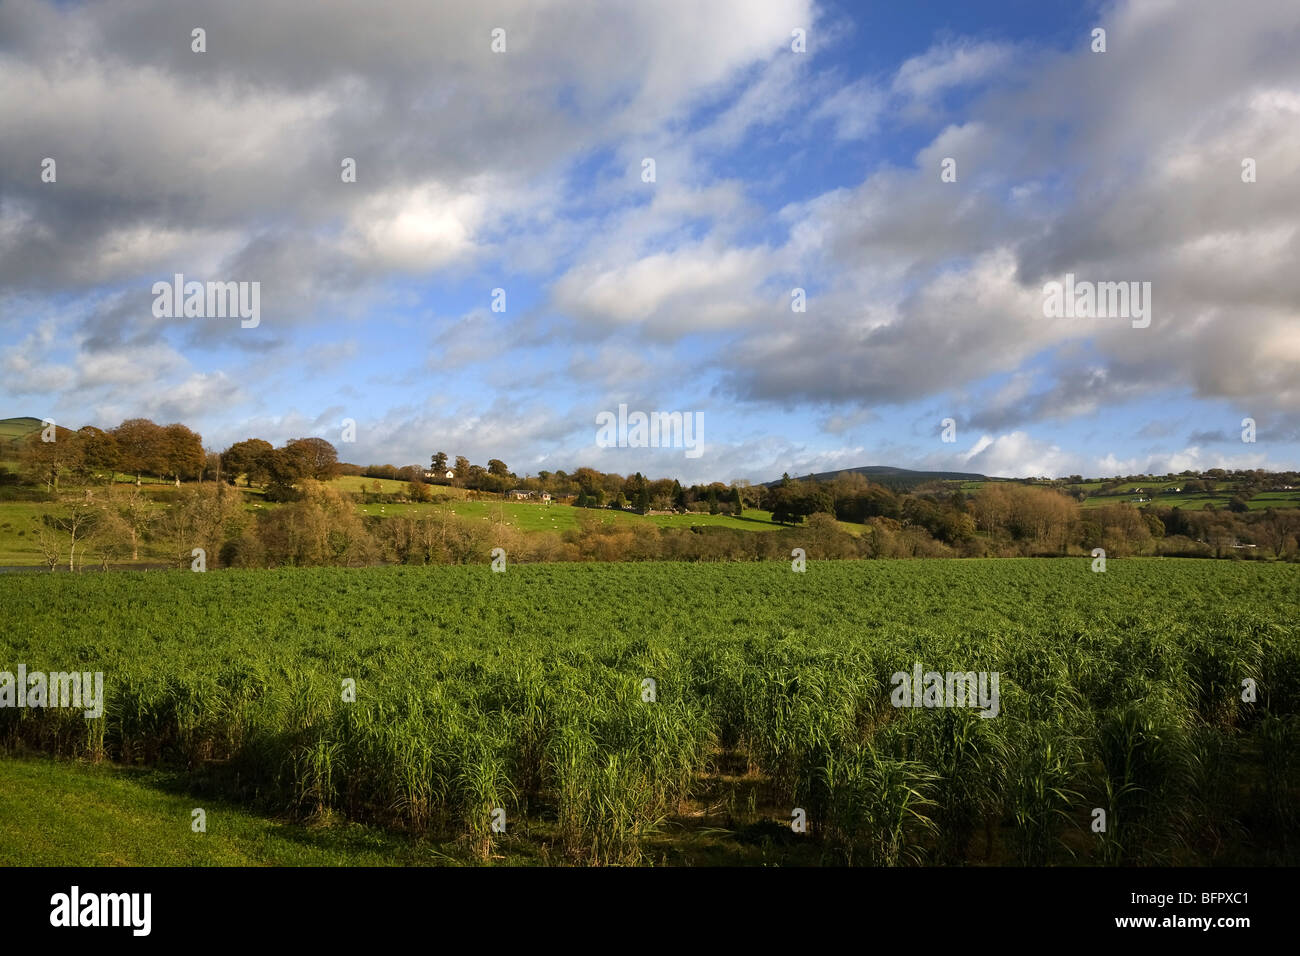 Field of Miscanthus Gianteus (Elephant Grass) for Biofuels, Near Inistioge, County Wexford, Ireland Stock Photo